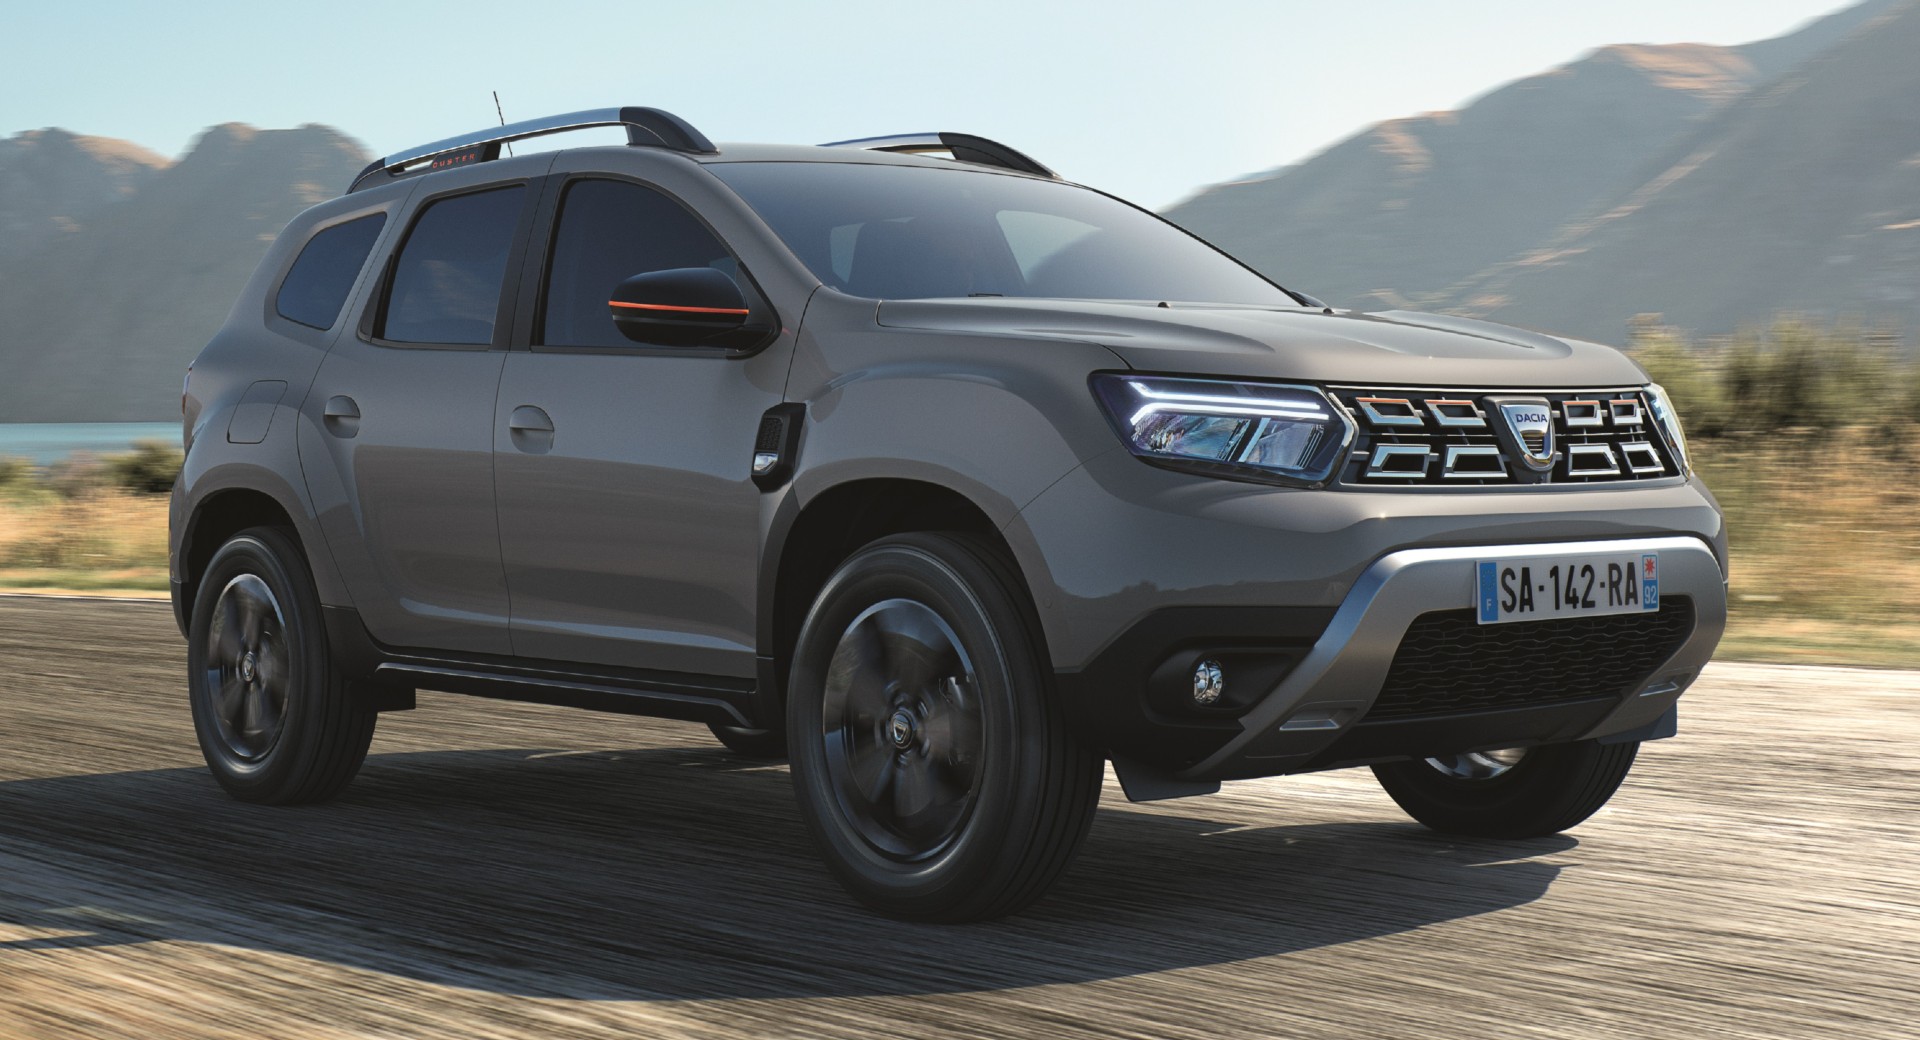 Facelifted Dacia Duster Gets Extreme Limited Edition For 2022